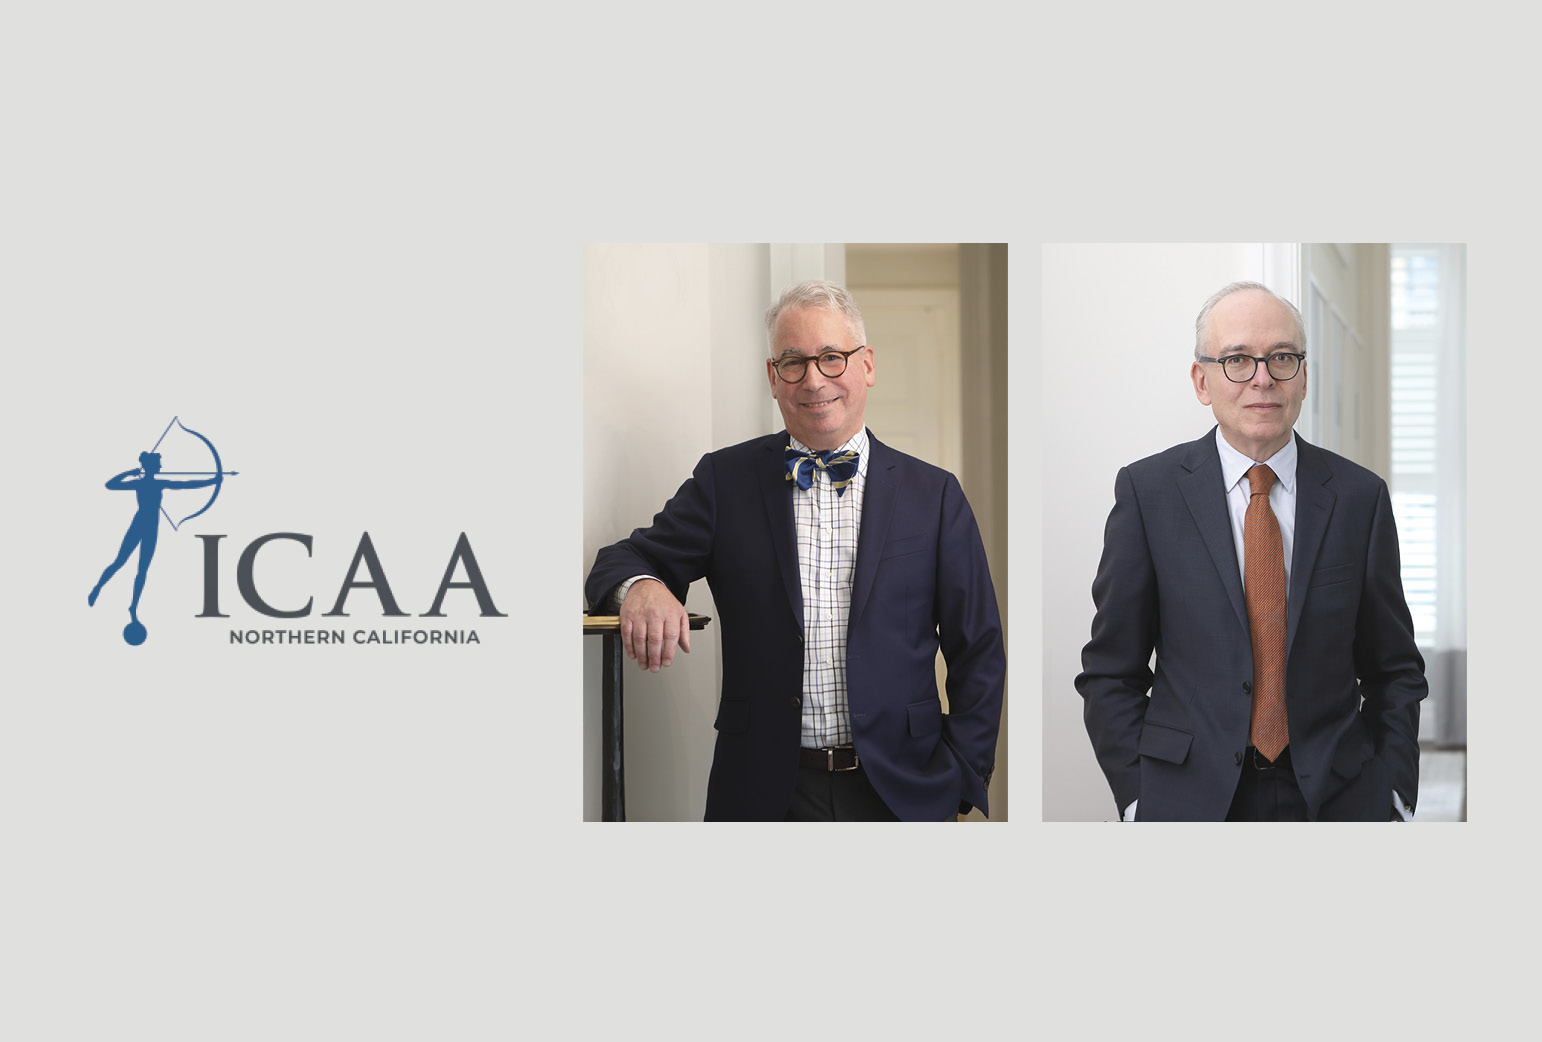 ICAA Northern California Webinar: “The Making of a House” with Roger Seifter and Randy Correll